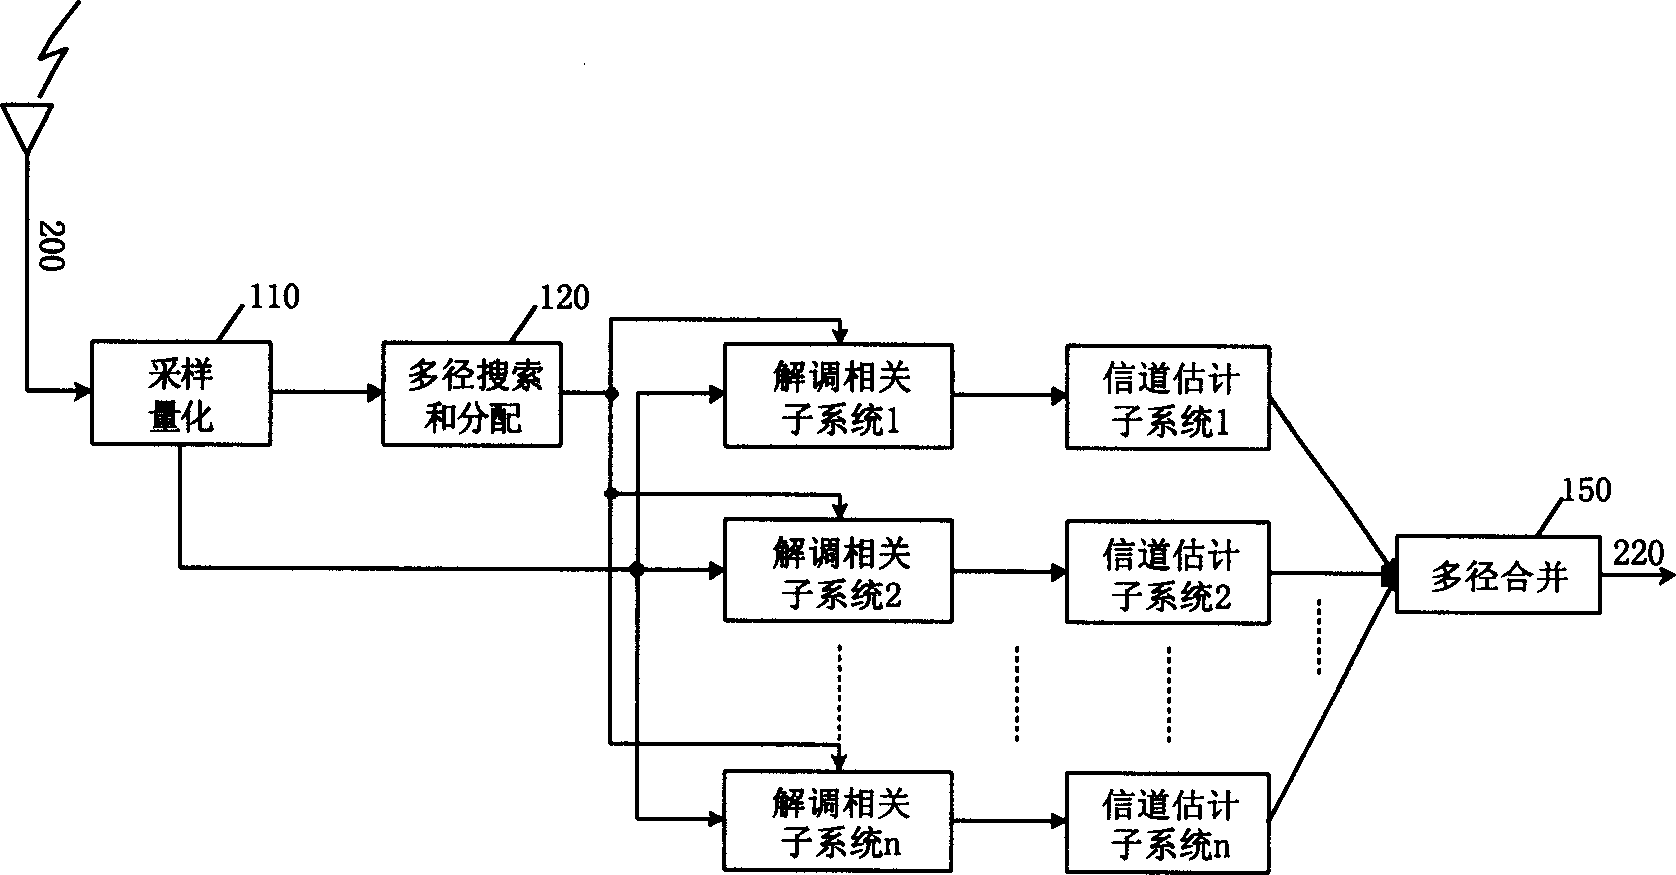 Data buffer storage method and device for broadband code division multiple access multipath diversity receiver